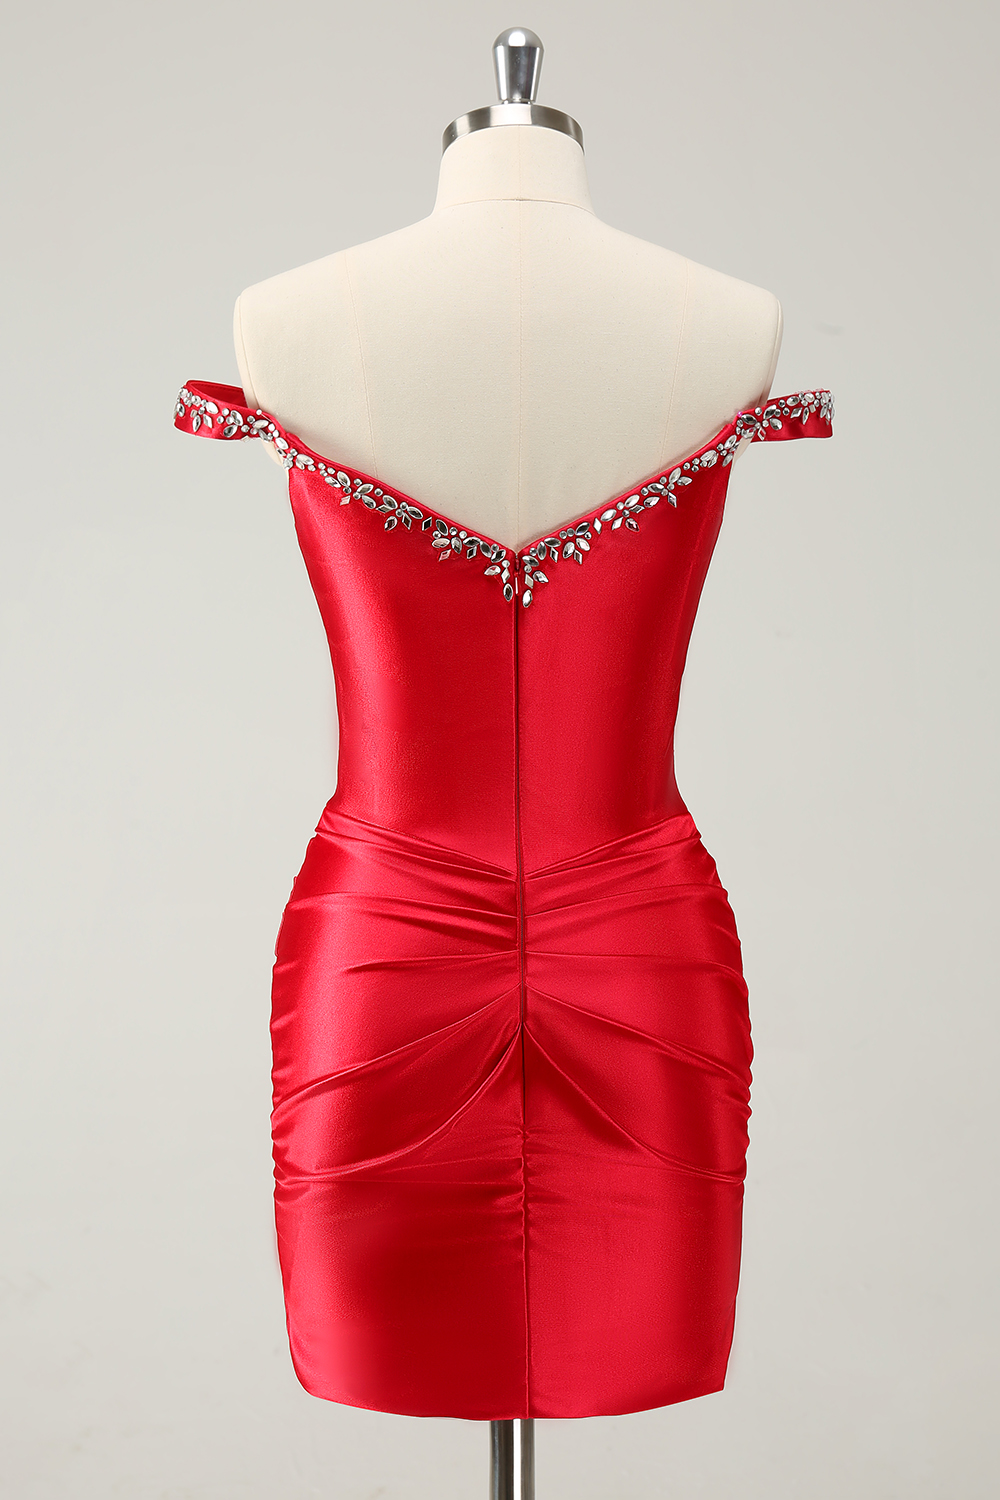 Red Off the Shoulder Satin Mini Homecoming Dress with Rhinestone